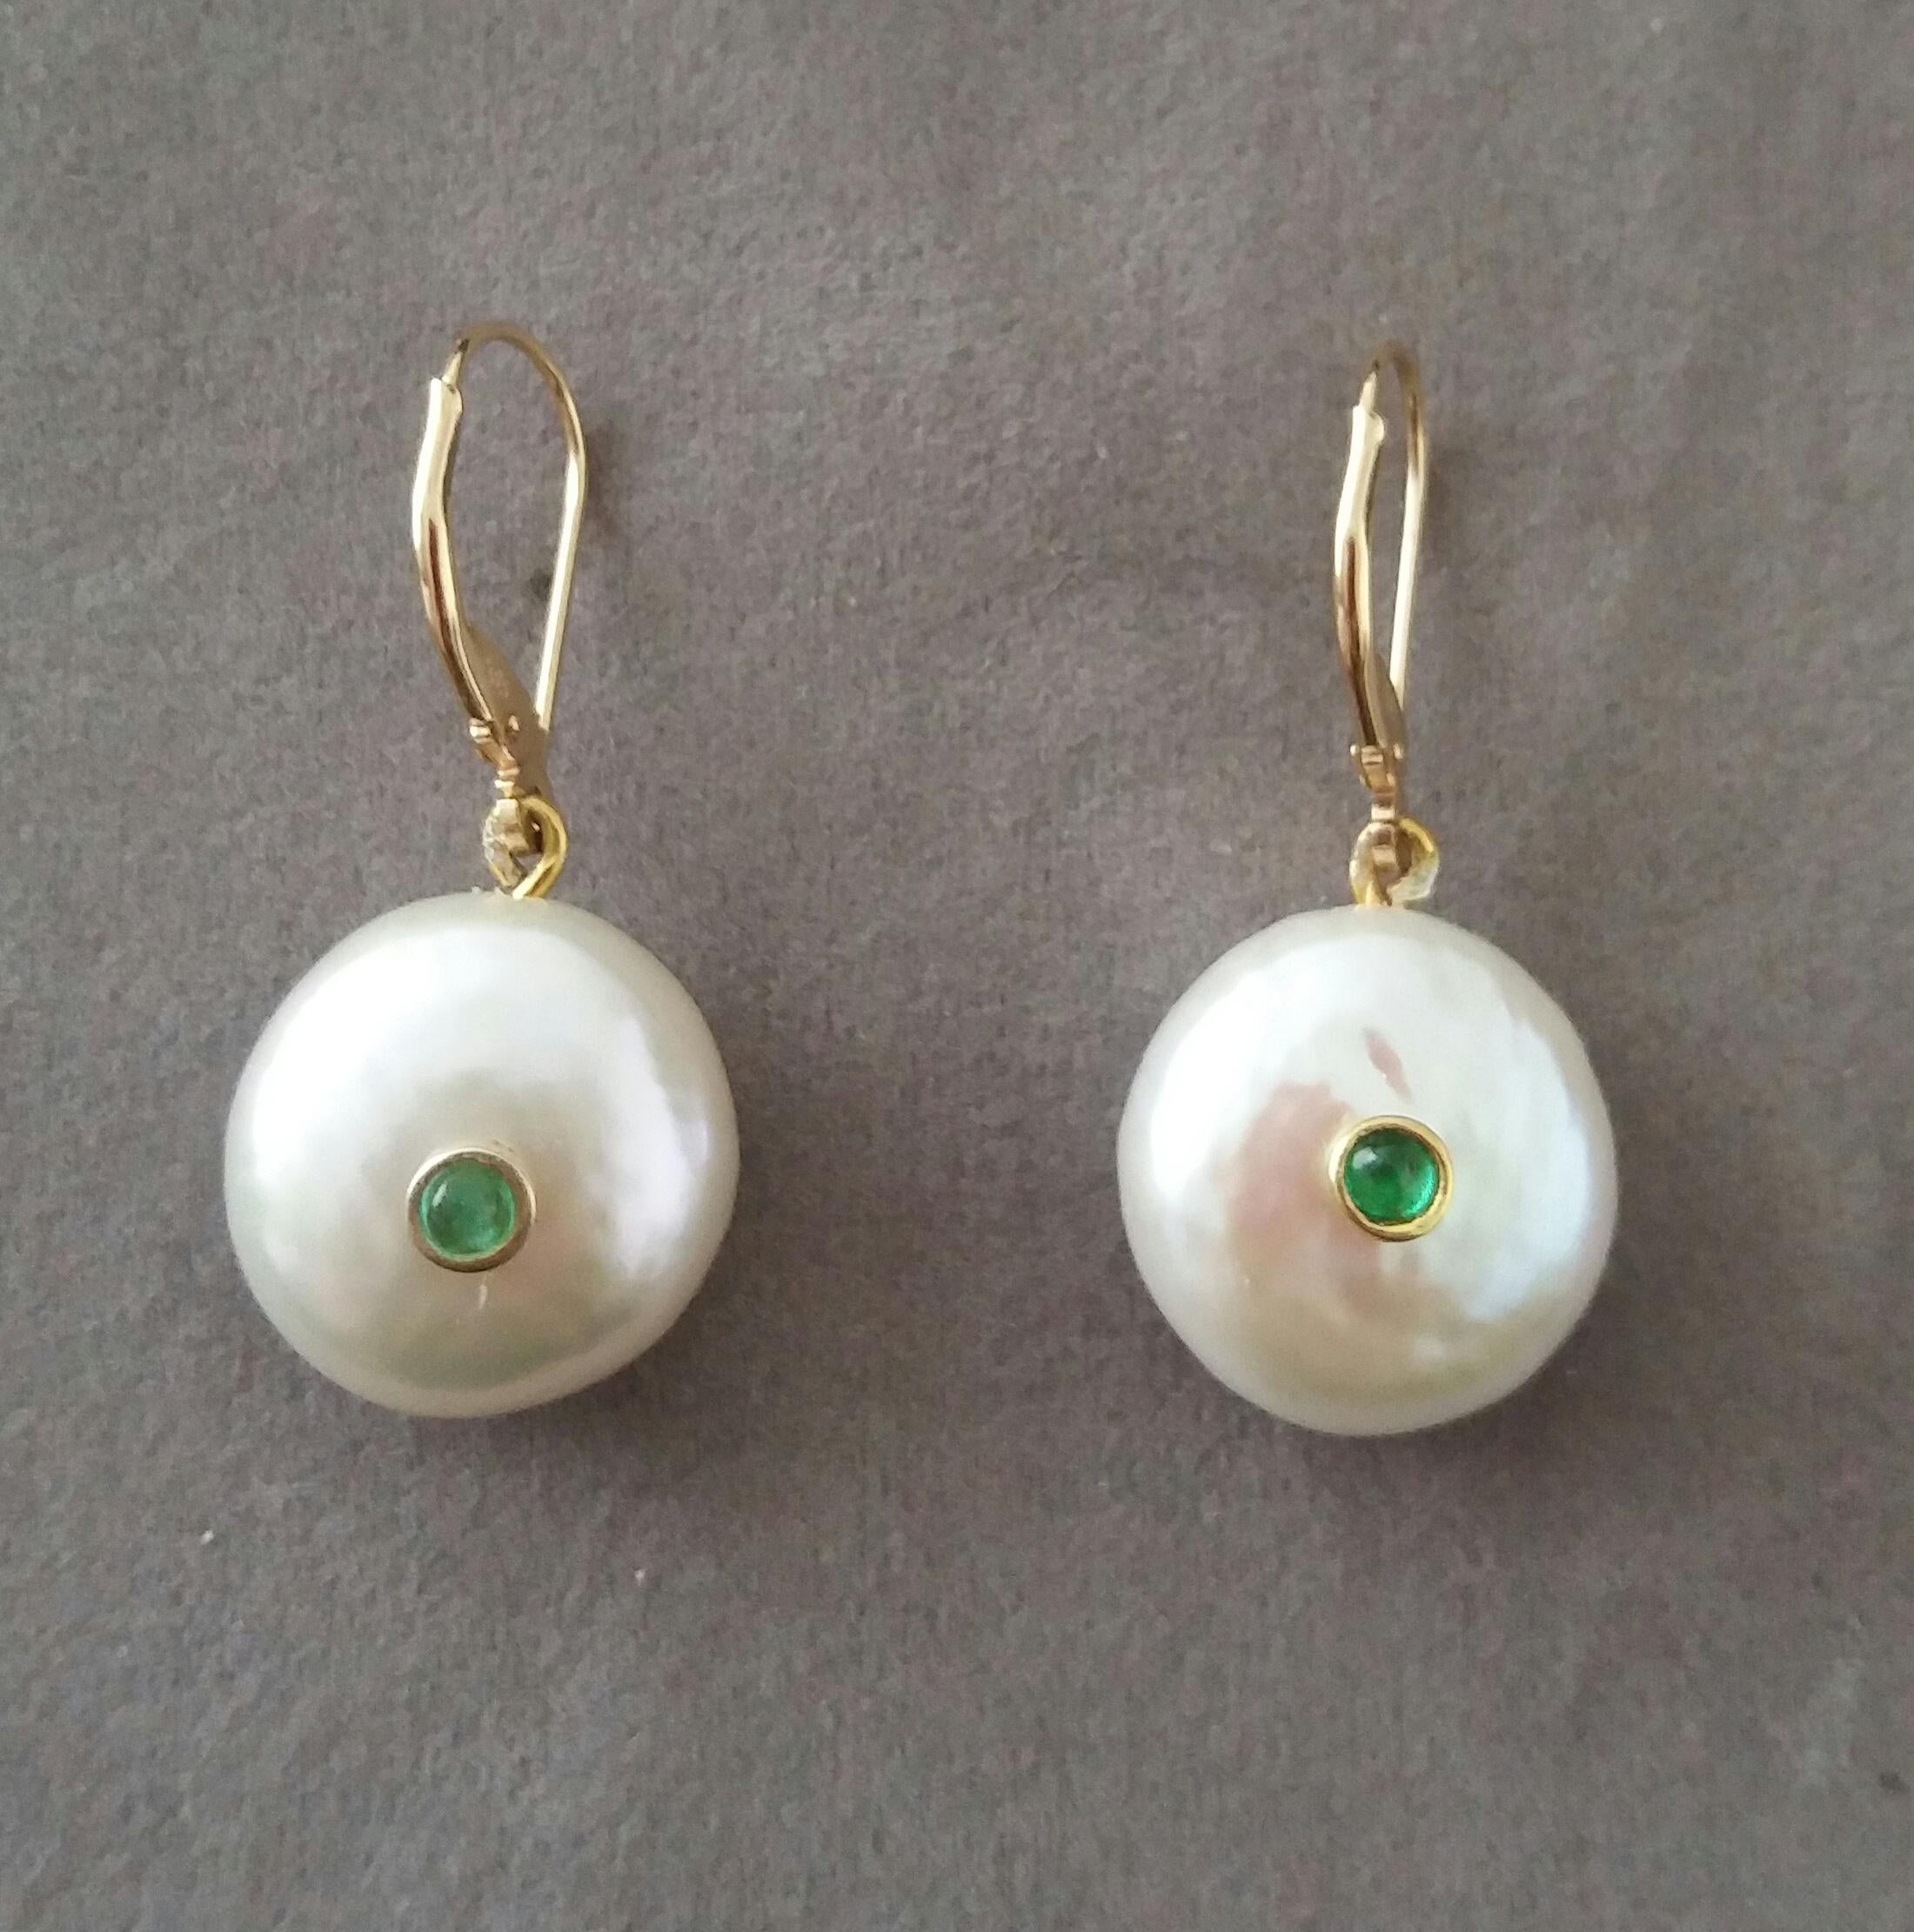 Simple chic earrings composed of 2 Flat Round Fresh Water Pearls of 16 mm in diameter with a small Emerald round cabochons in the center suspended by a pair of 14 K yellow gold clip.

In 1978 our workshop started in Italy to make simple-chic Art